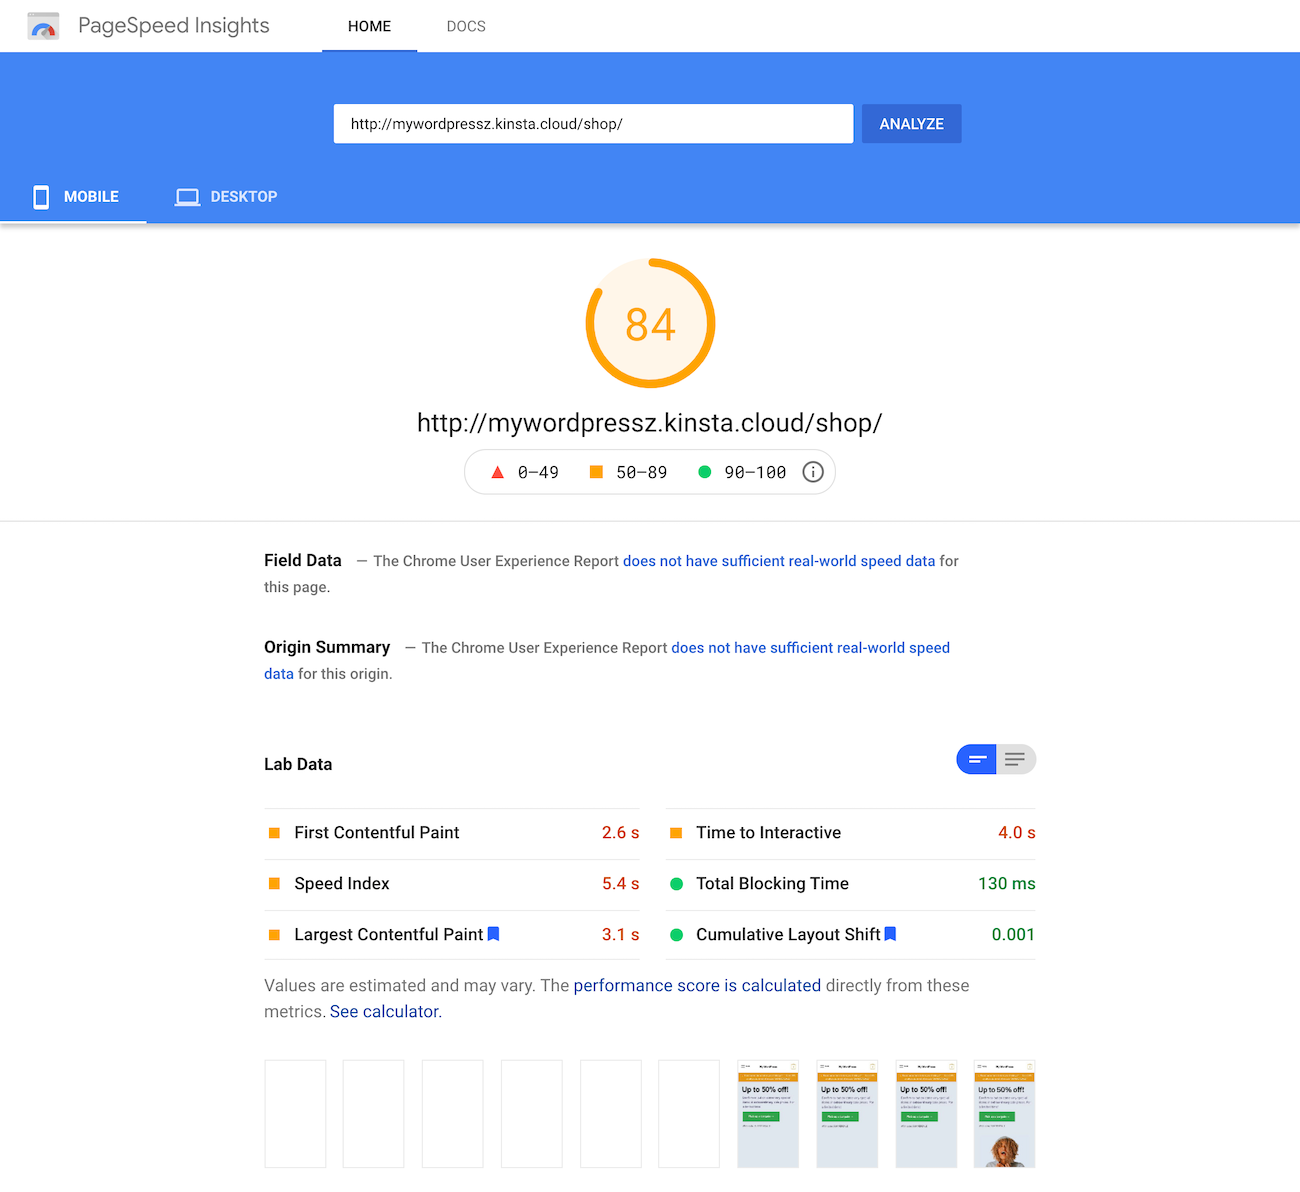 Google PageSpeed Insights test of the shop page